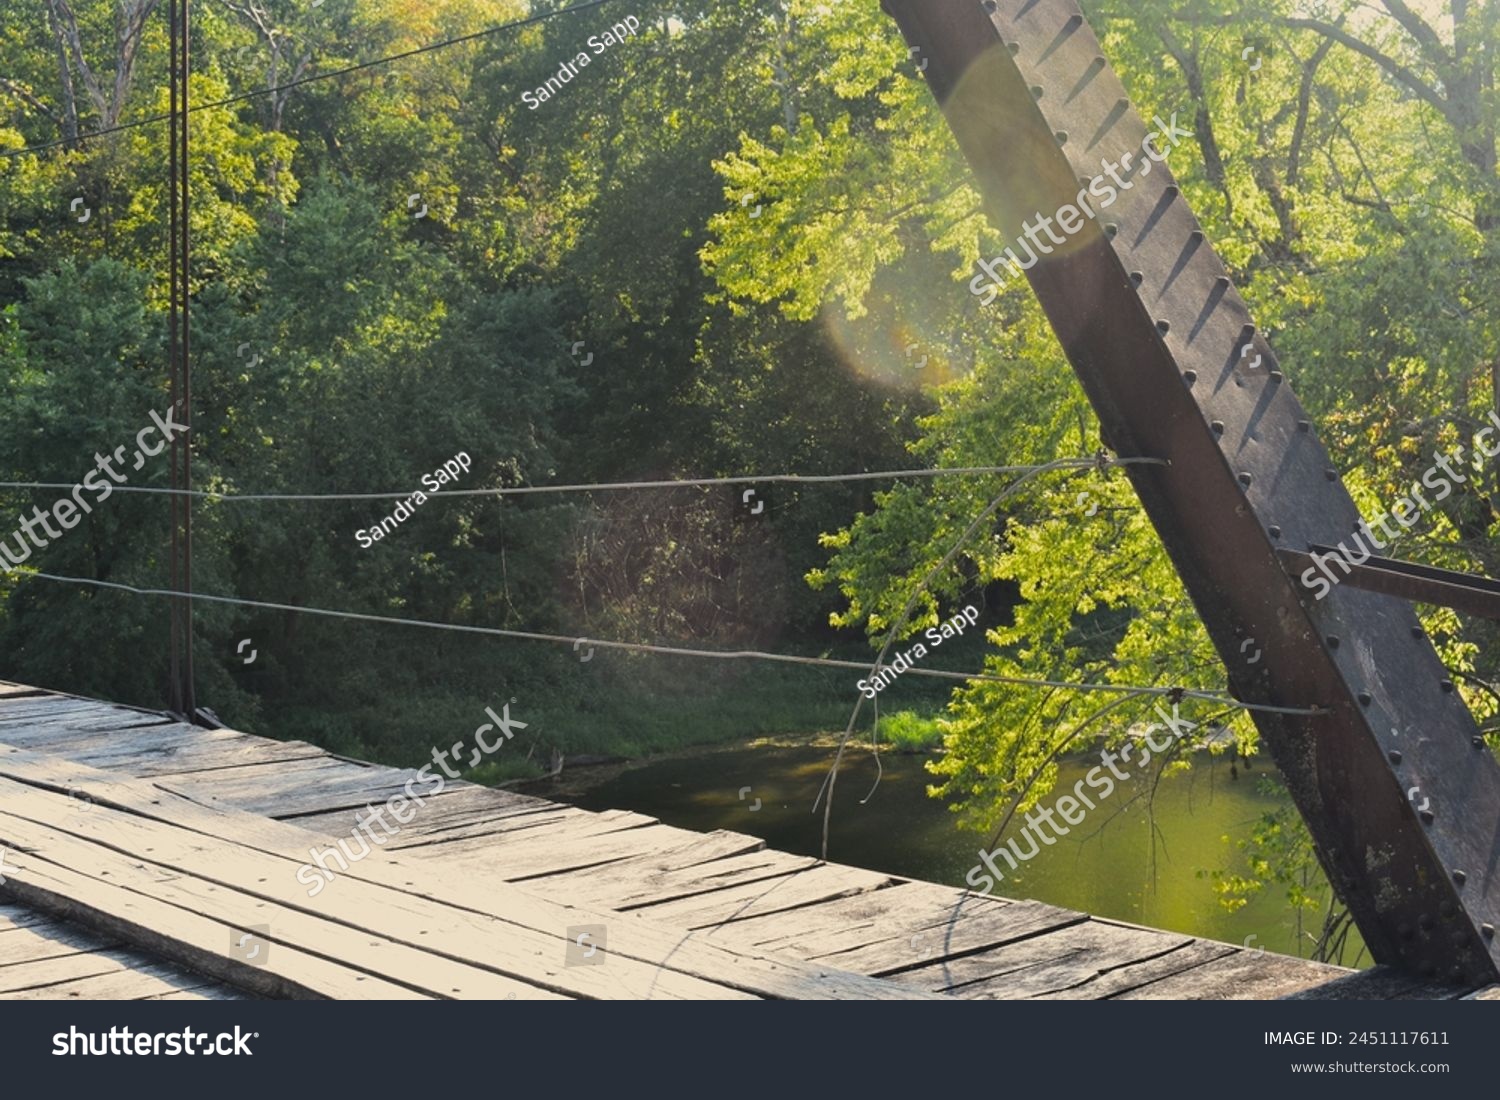 William's Bend Bridge, aka Rough Holler Bridge, is a historic steel truss bridge with wooden flooring, spanning the Pomme de Terre river near Hermitage, MO, United States, US. It was built in 1890. #2451117611